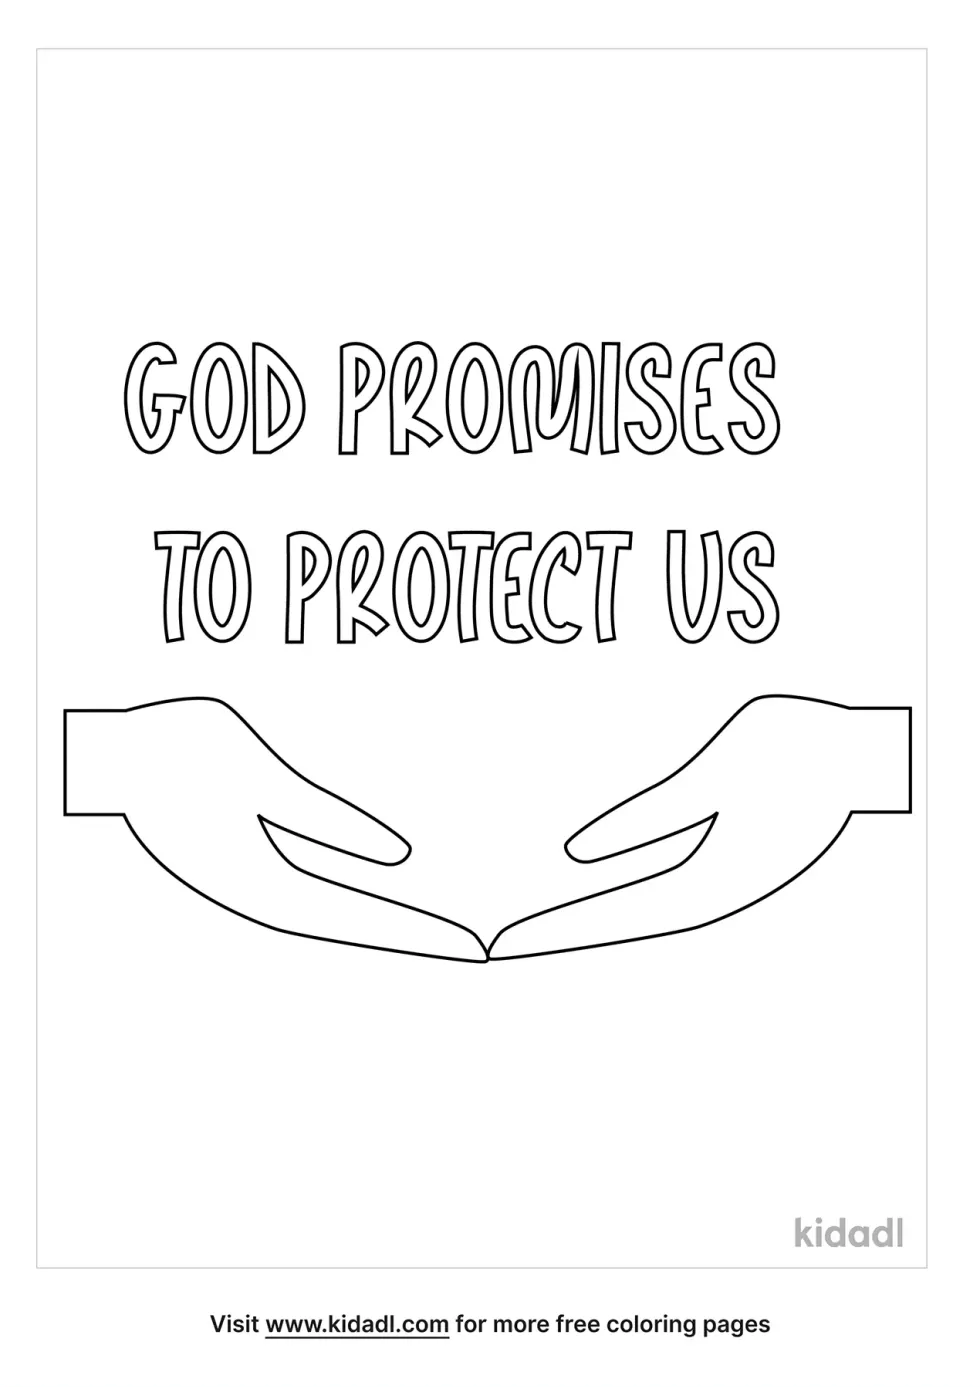 God Promises To Protect Us